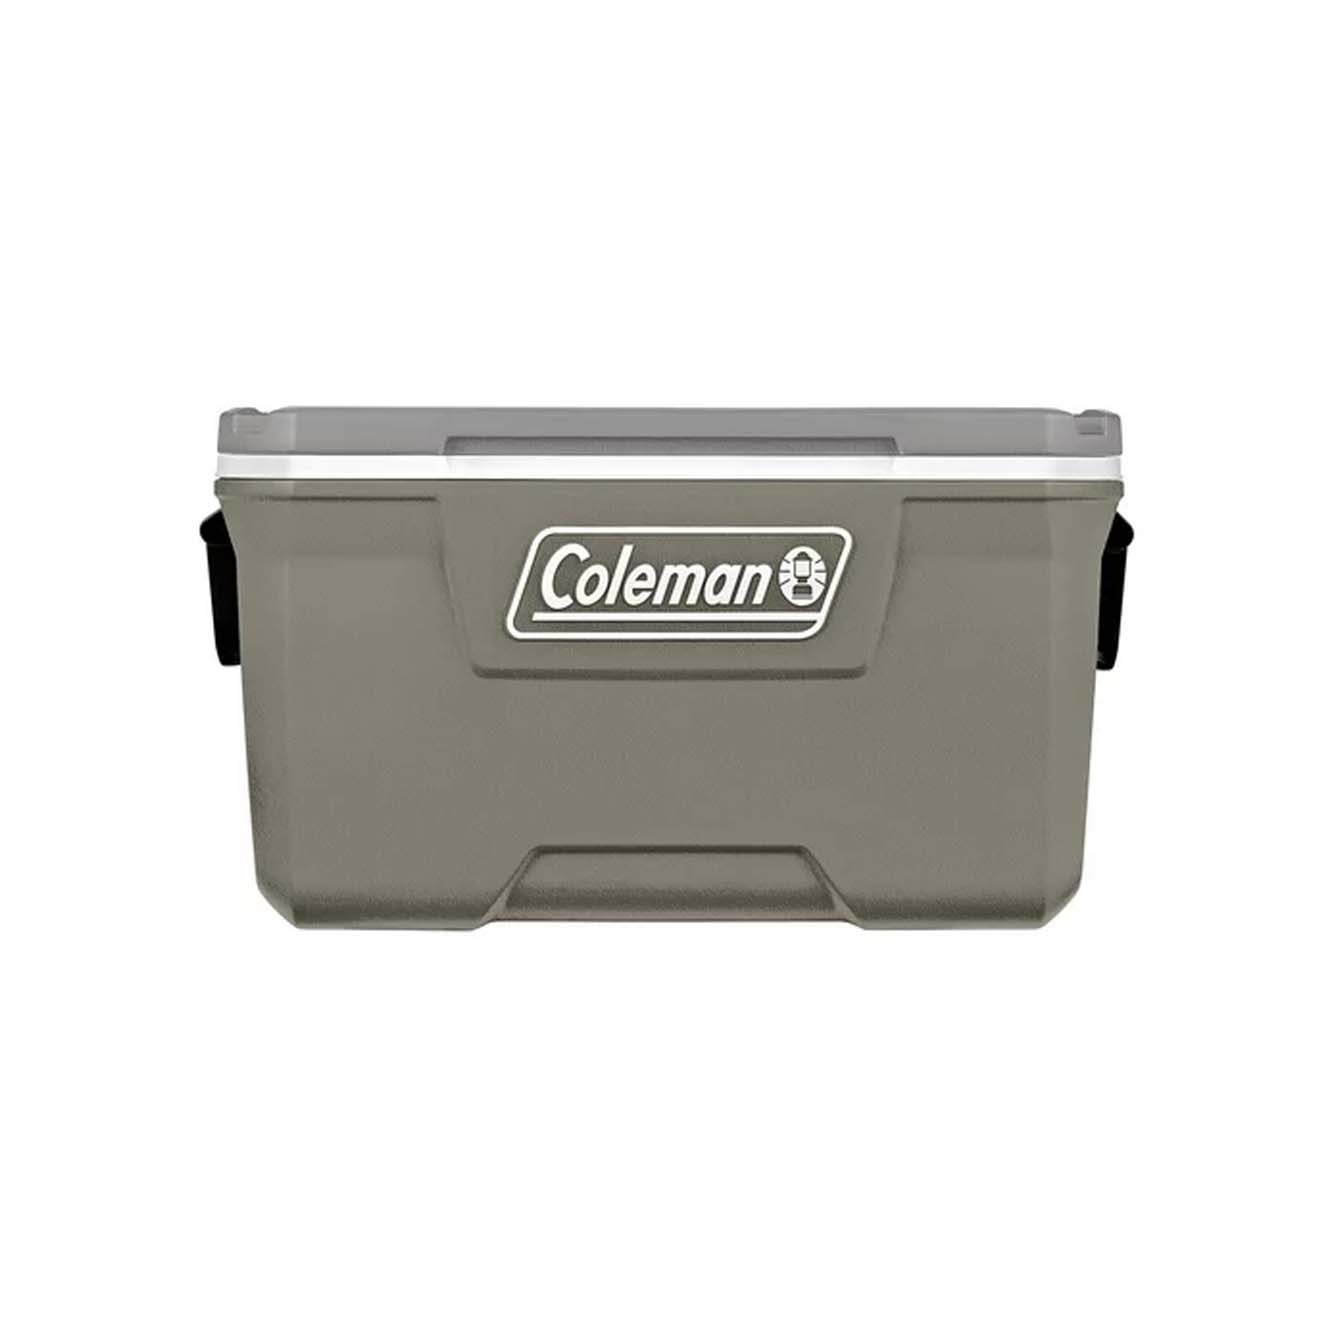 Coleman 316 Series 70QT Hard Chest Cooler in silver ash